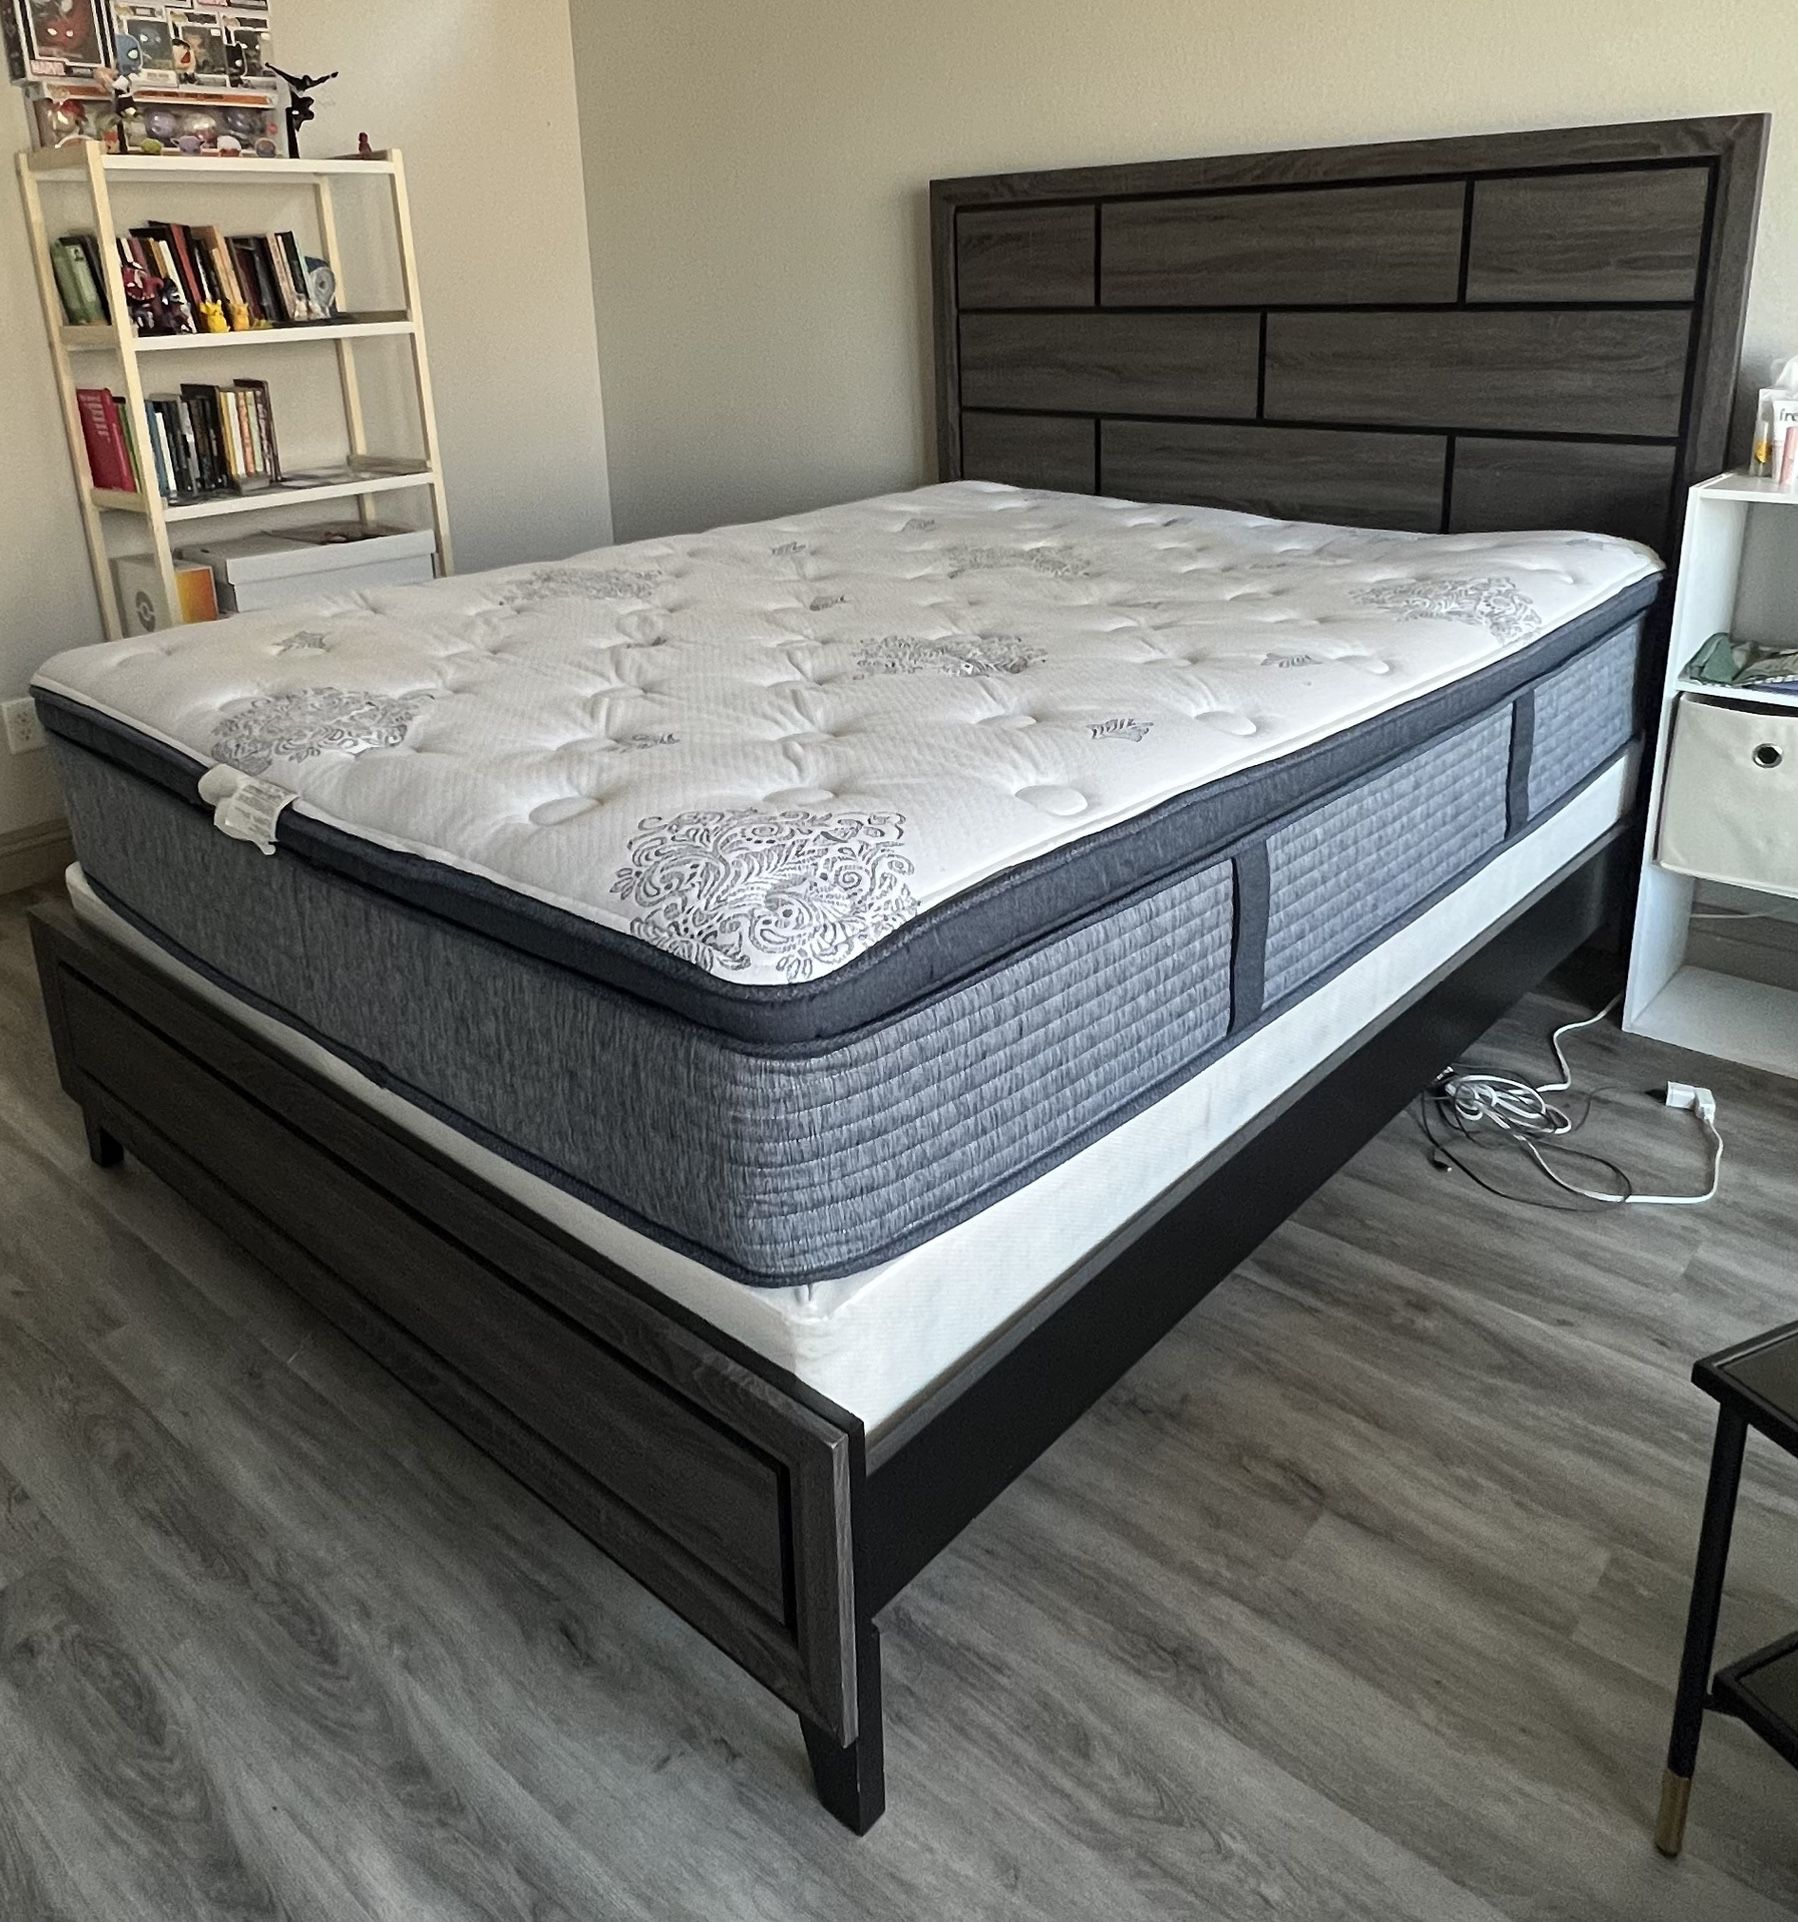 Queen Mattress With Box Spring And Bed frame Included 